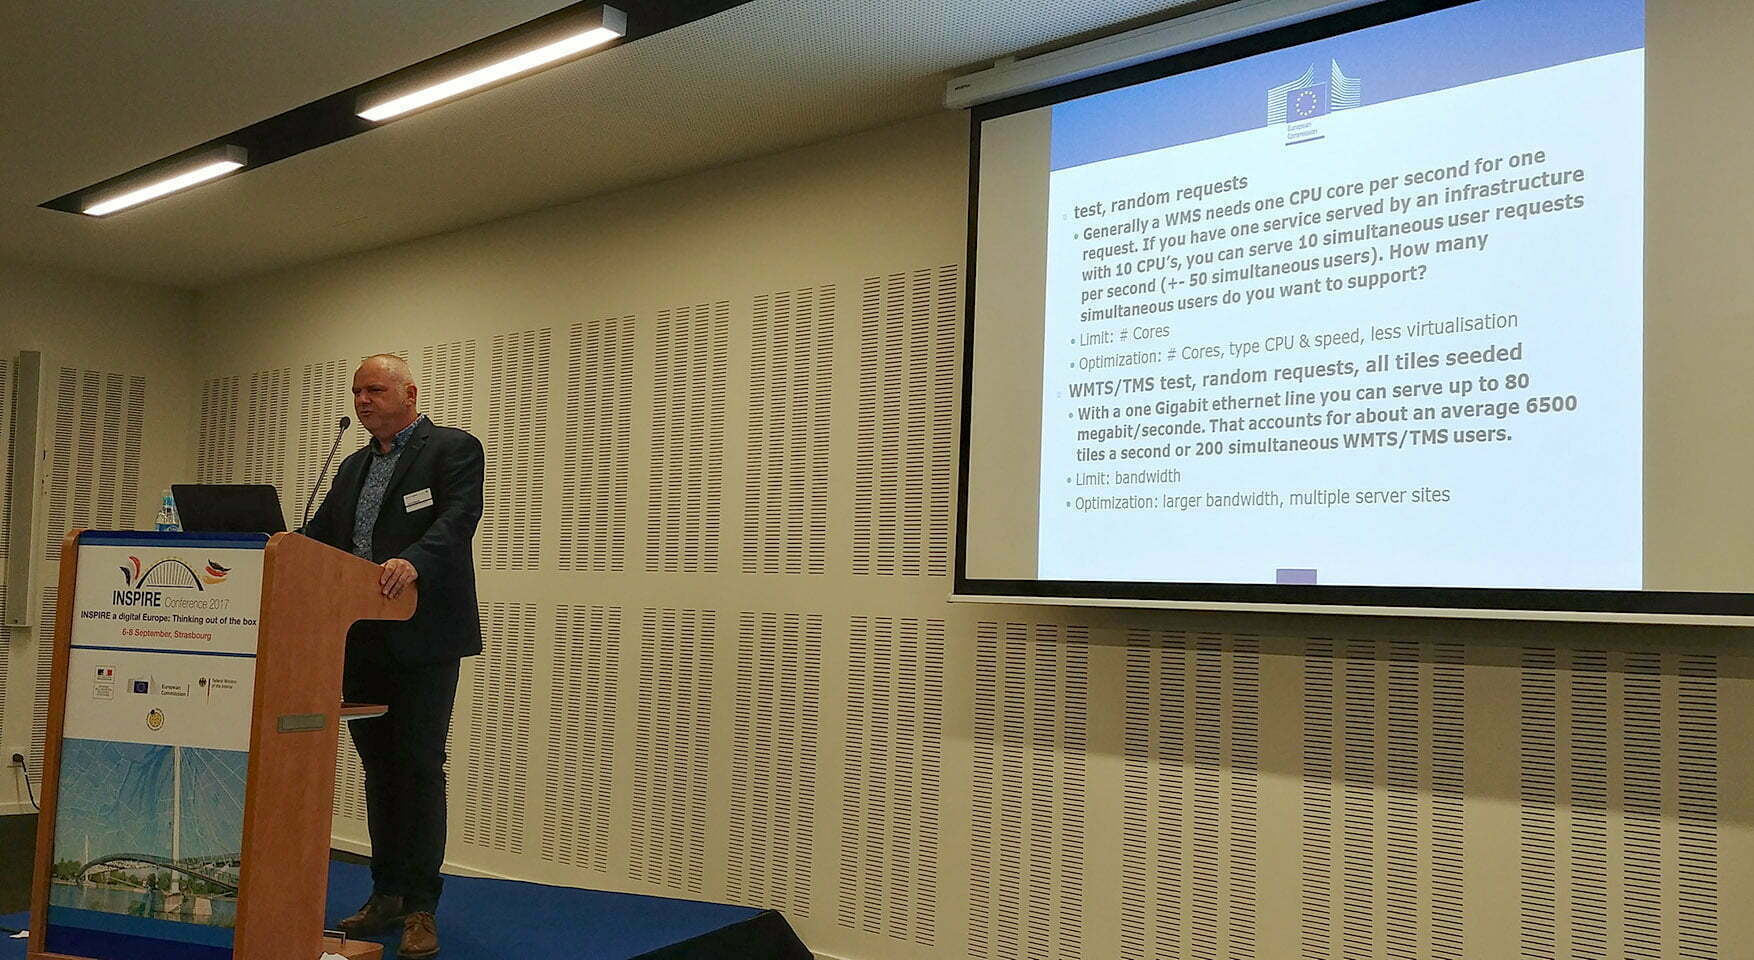 Joeri Robbrecht from DG ENV gives an introduction to the INSPIRE requirements and their impact